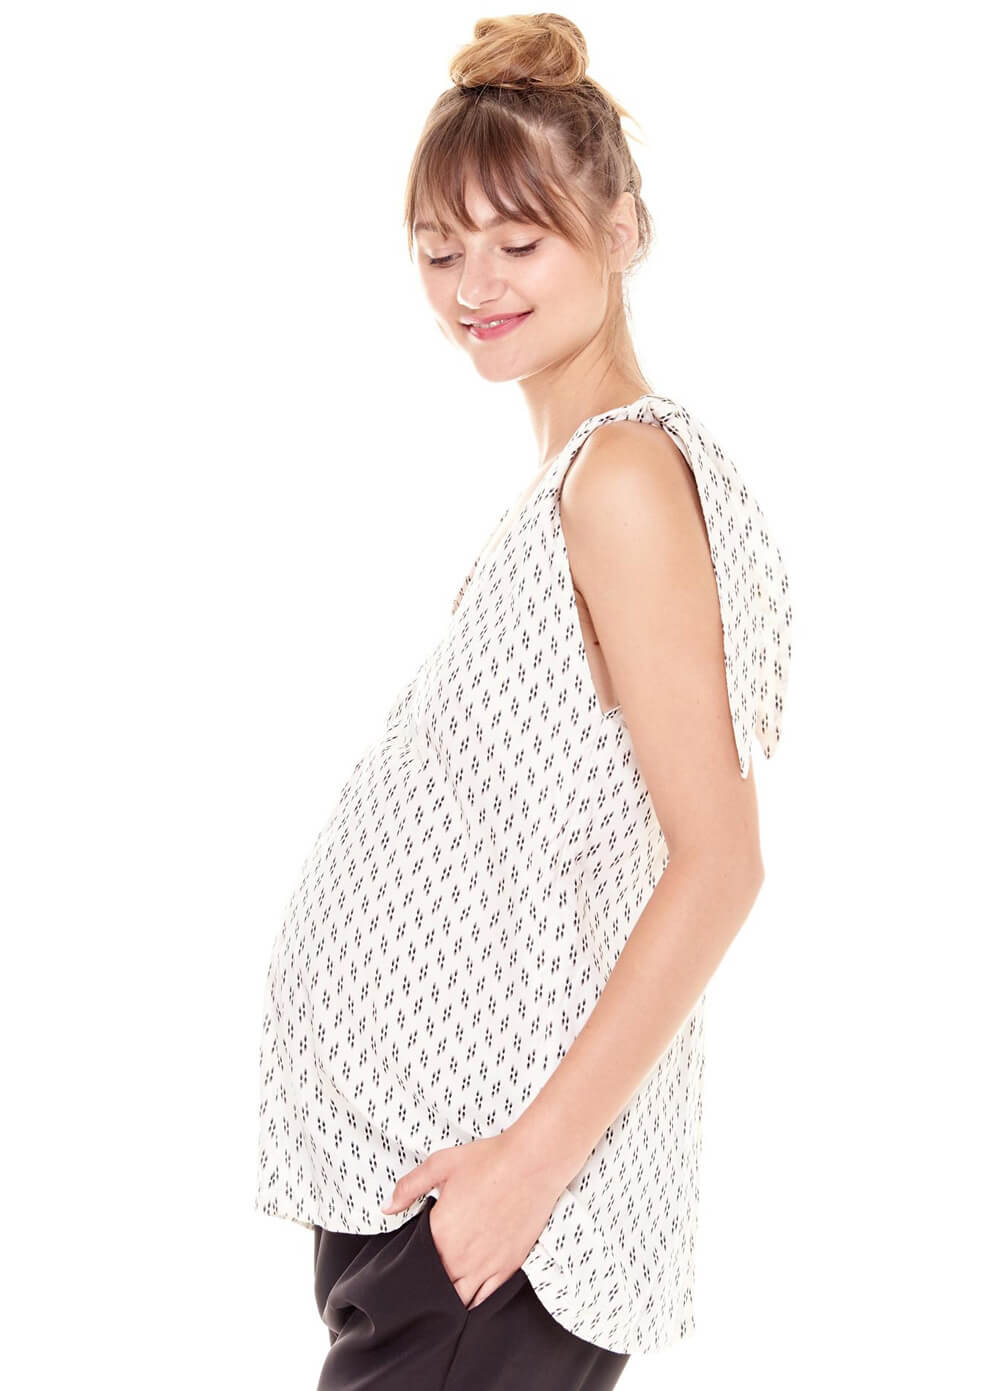 Shyla Maternity Tie Top in White Print by Imanimo